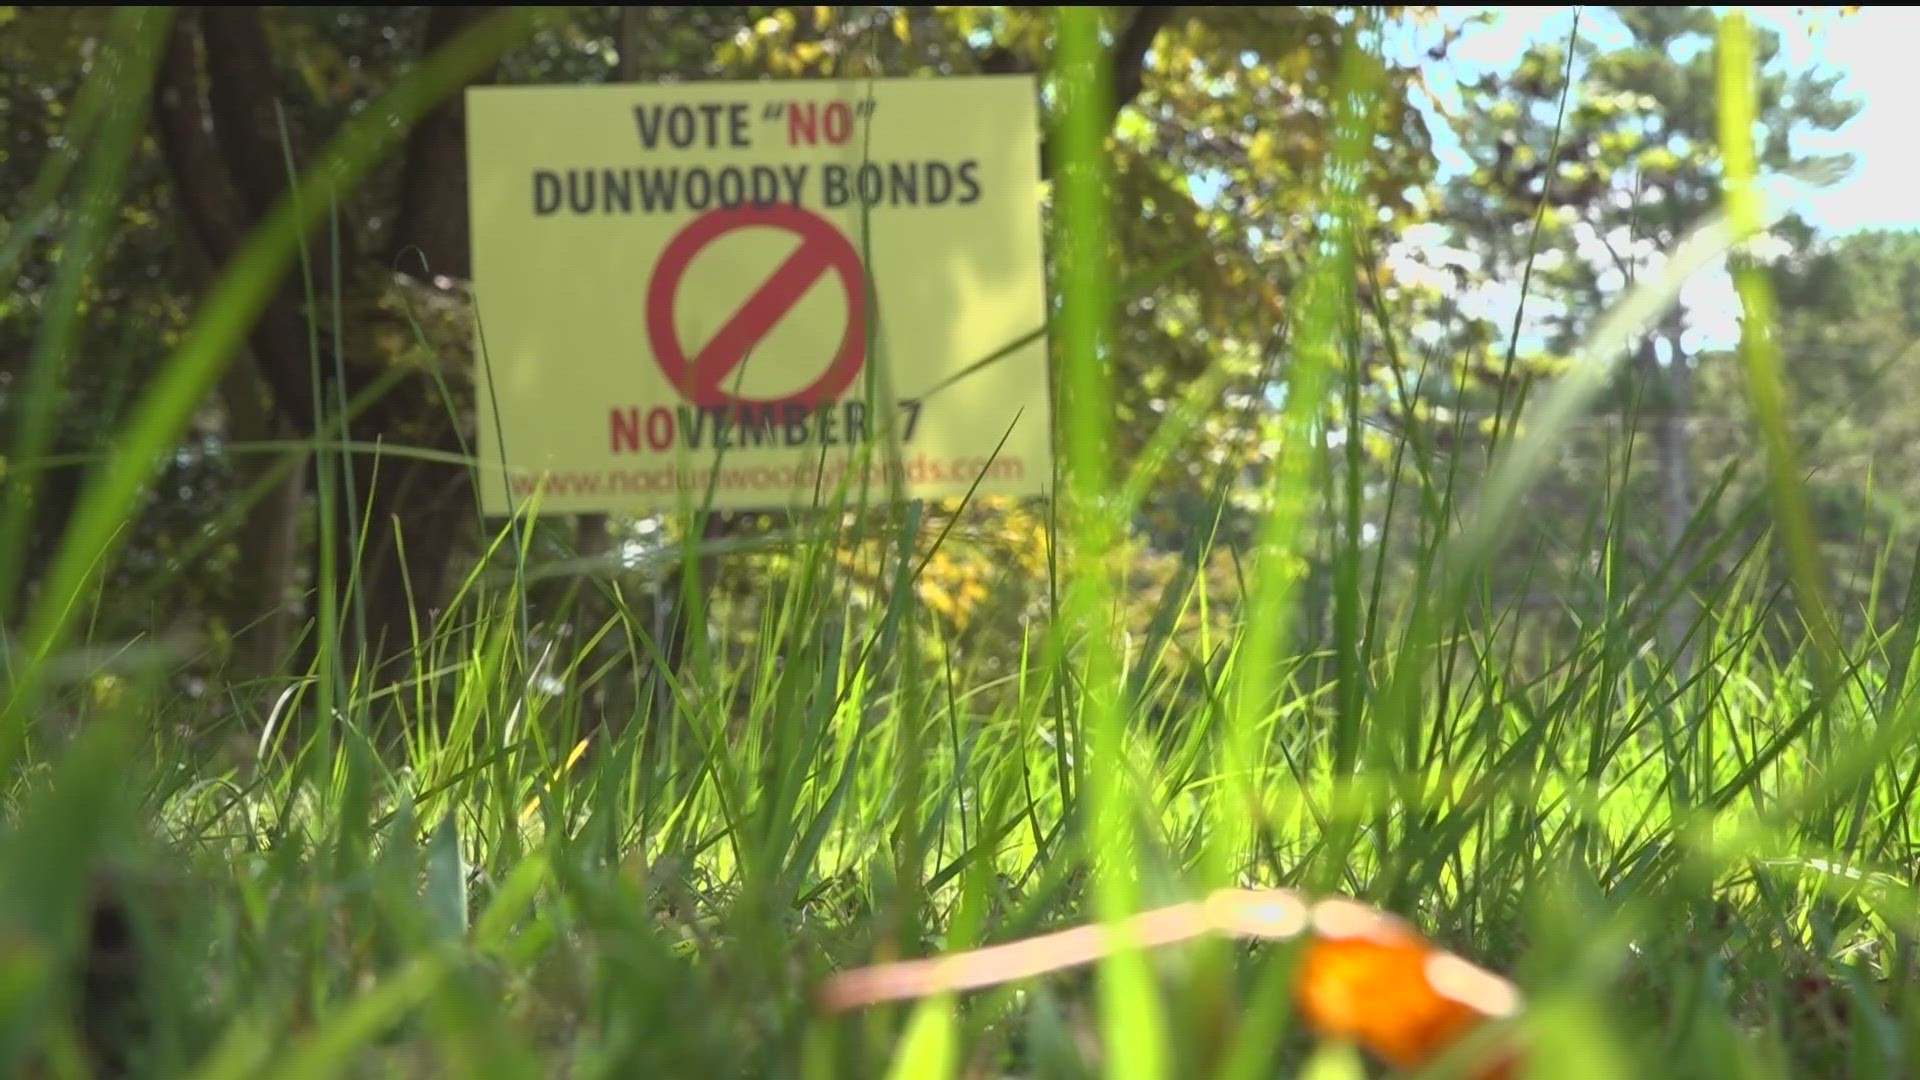 Groups for and against a $60 million bond referendum for Dunwoody parks are making voices heard.